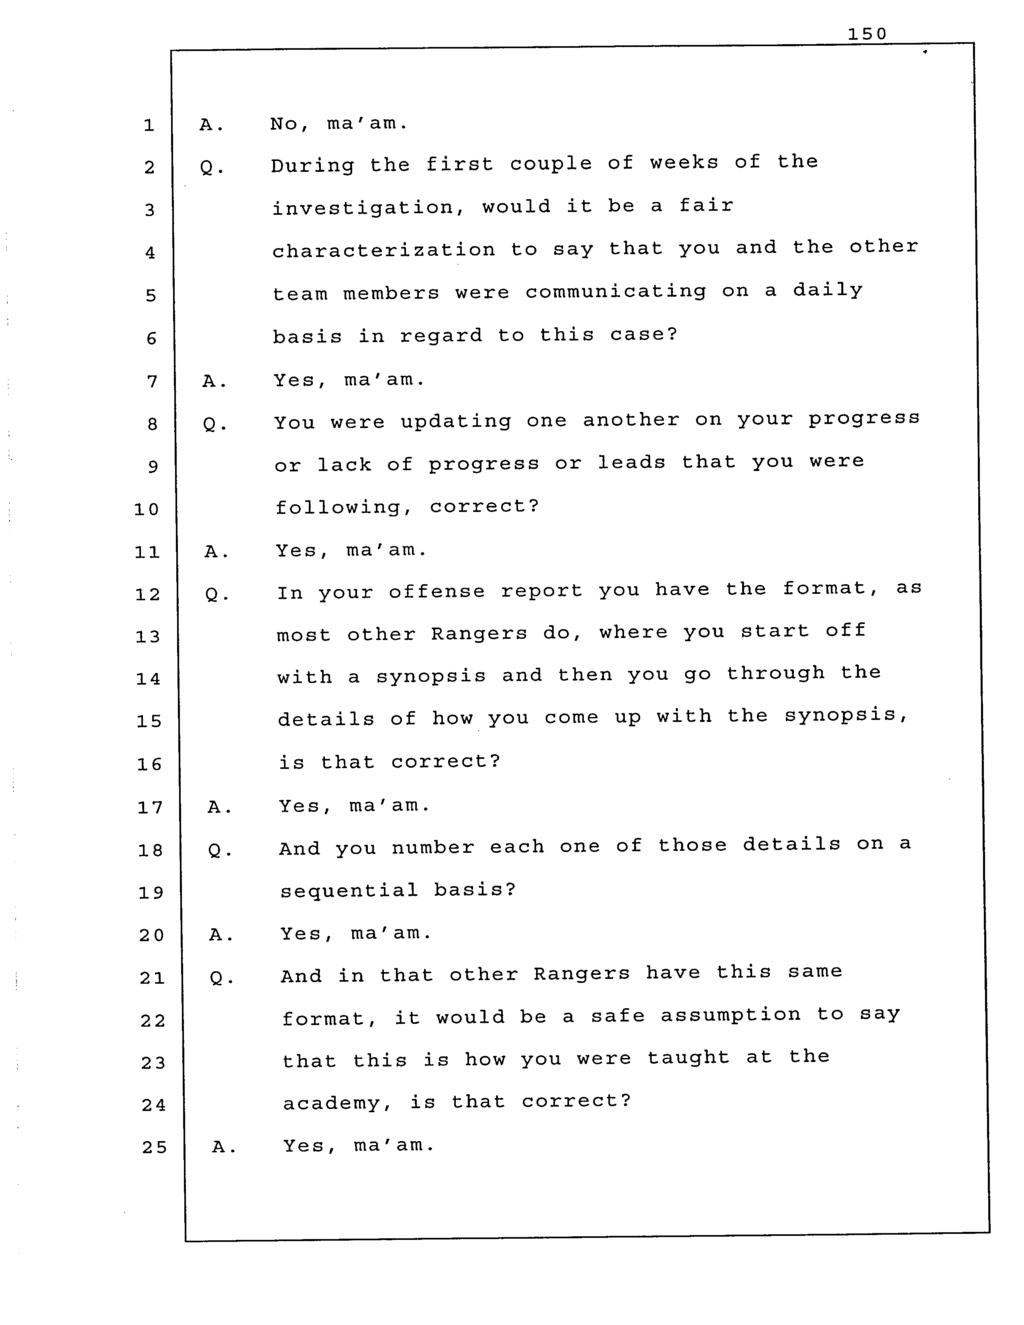 0 No, During the first couple of weeks of the investigation, would it be a fair characterization to say that you and the other team members were communicating on a basis in regard to this case?